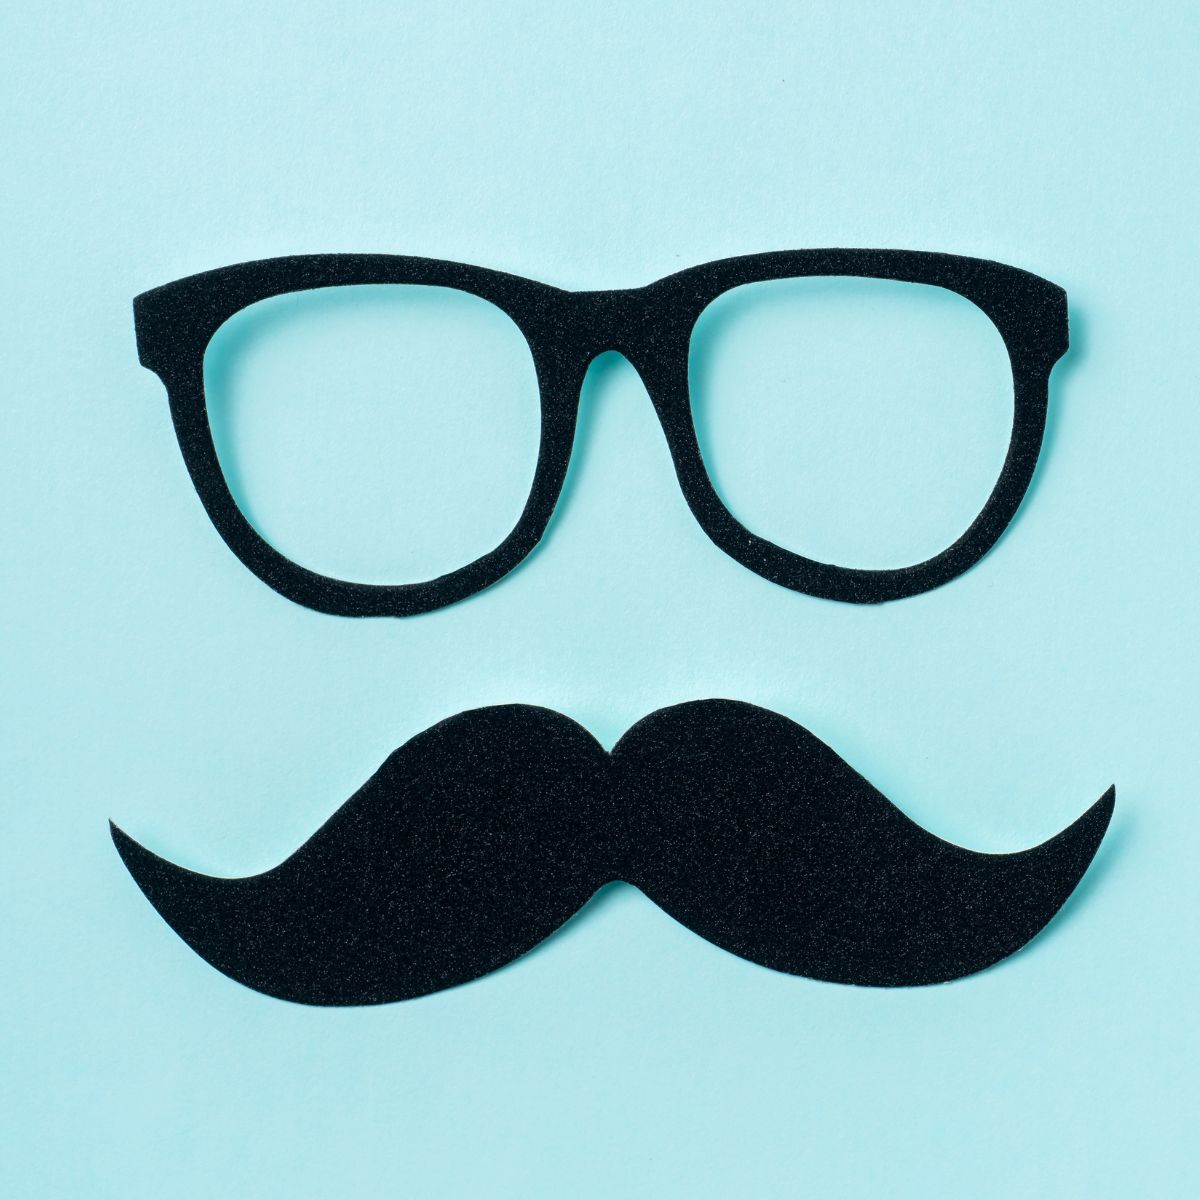 Black paper glasses and black paper mustache on blue background